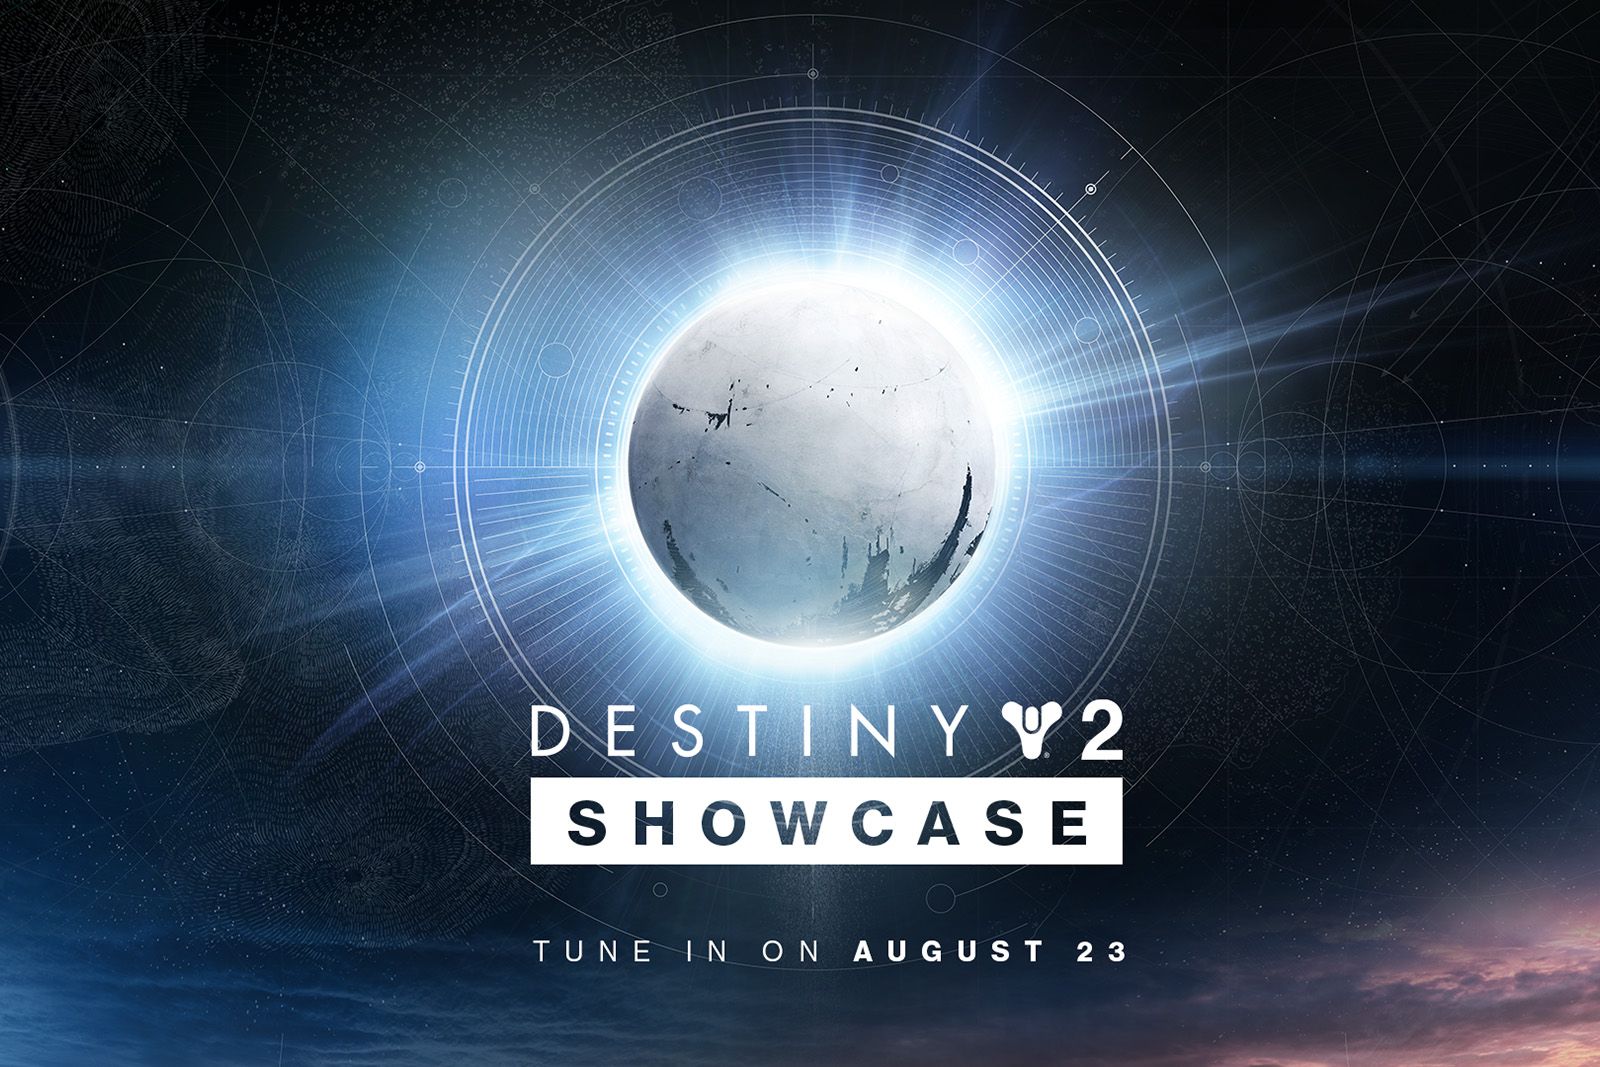 Destiny 2 Showcase: How to watch Bungie's next update event photo 2